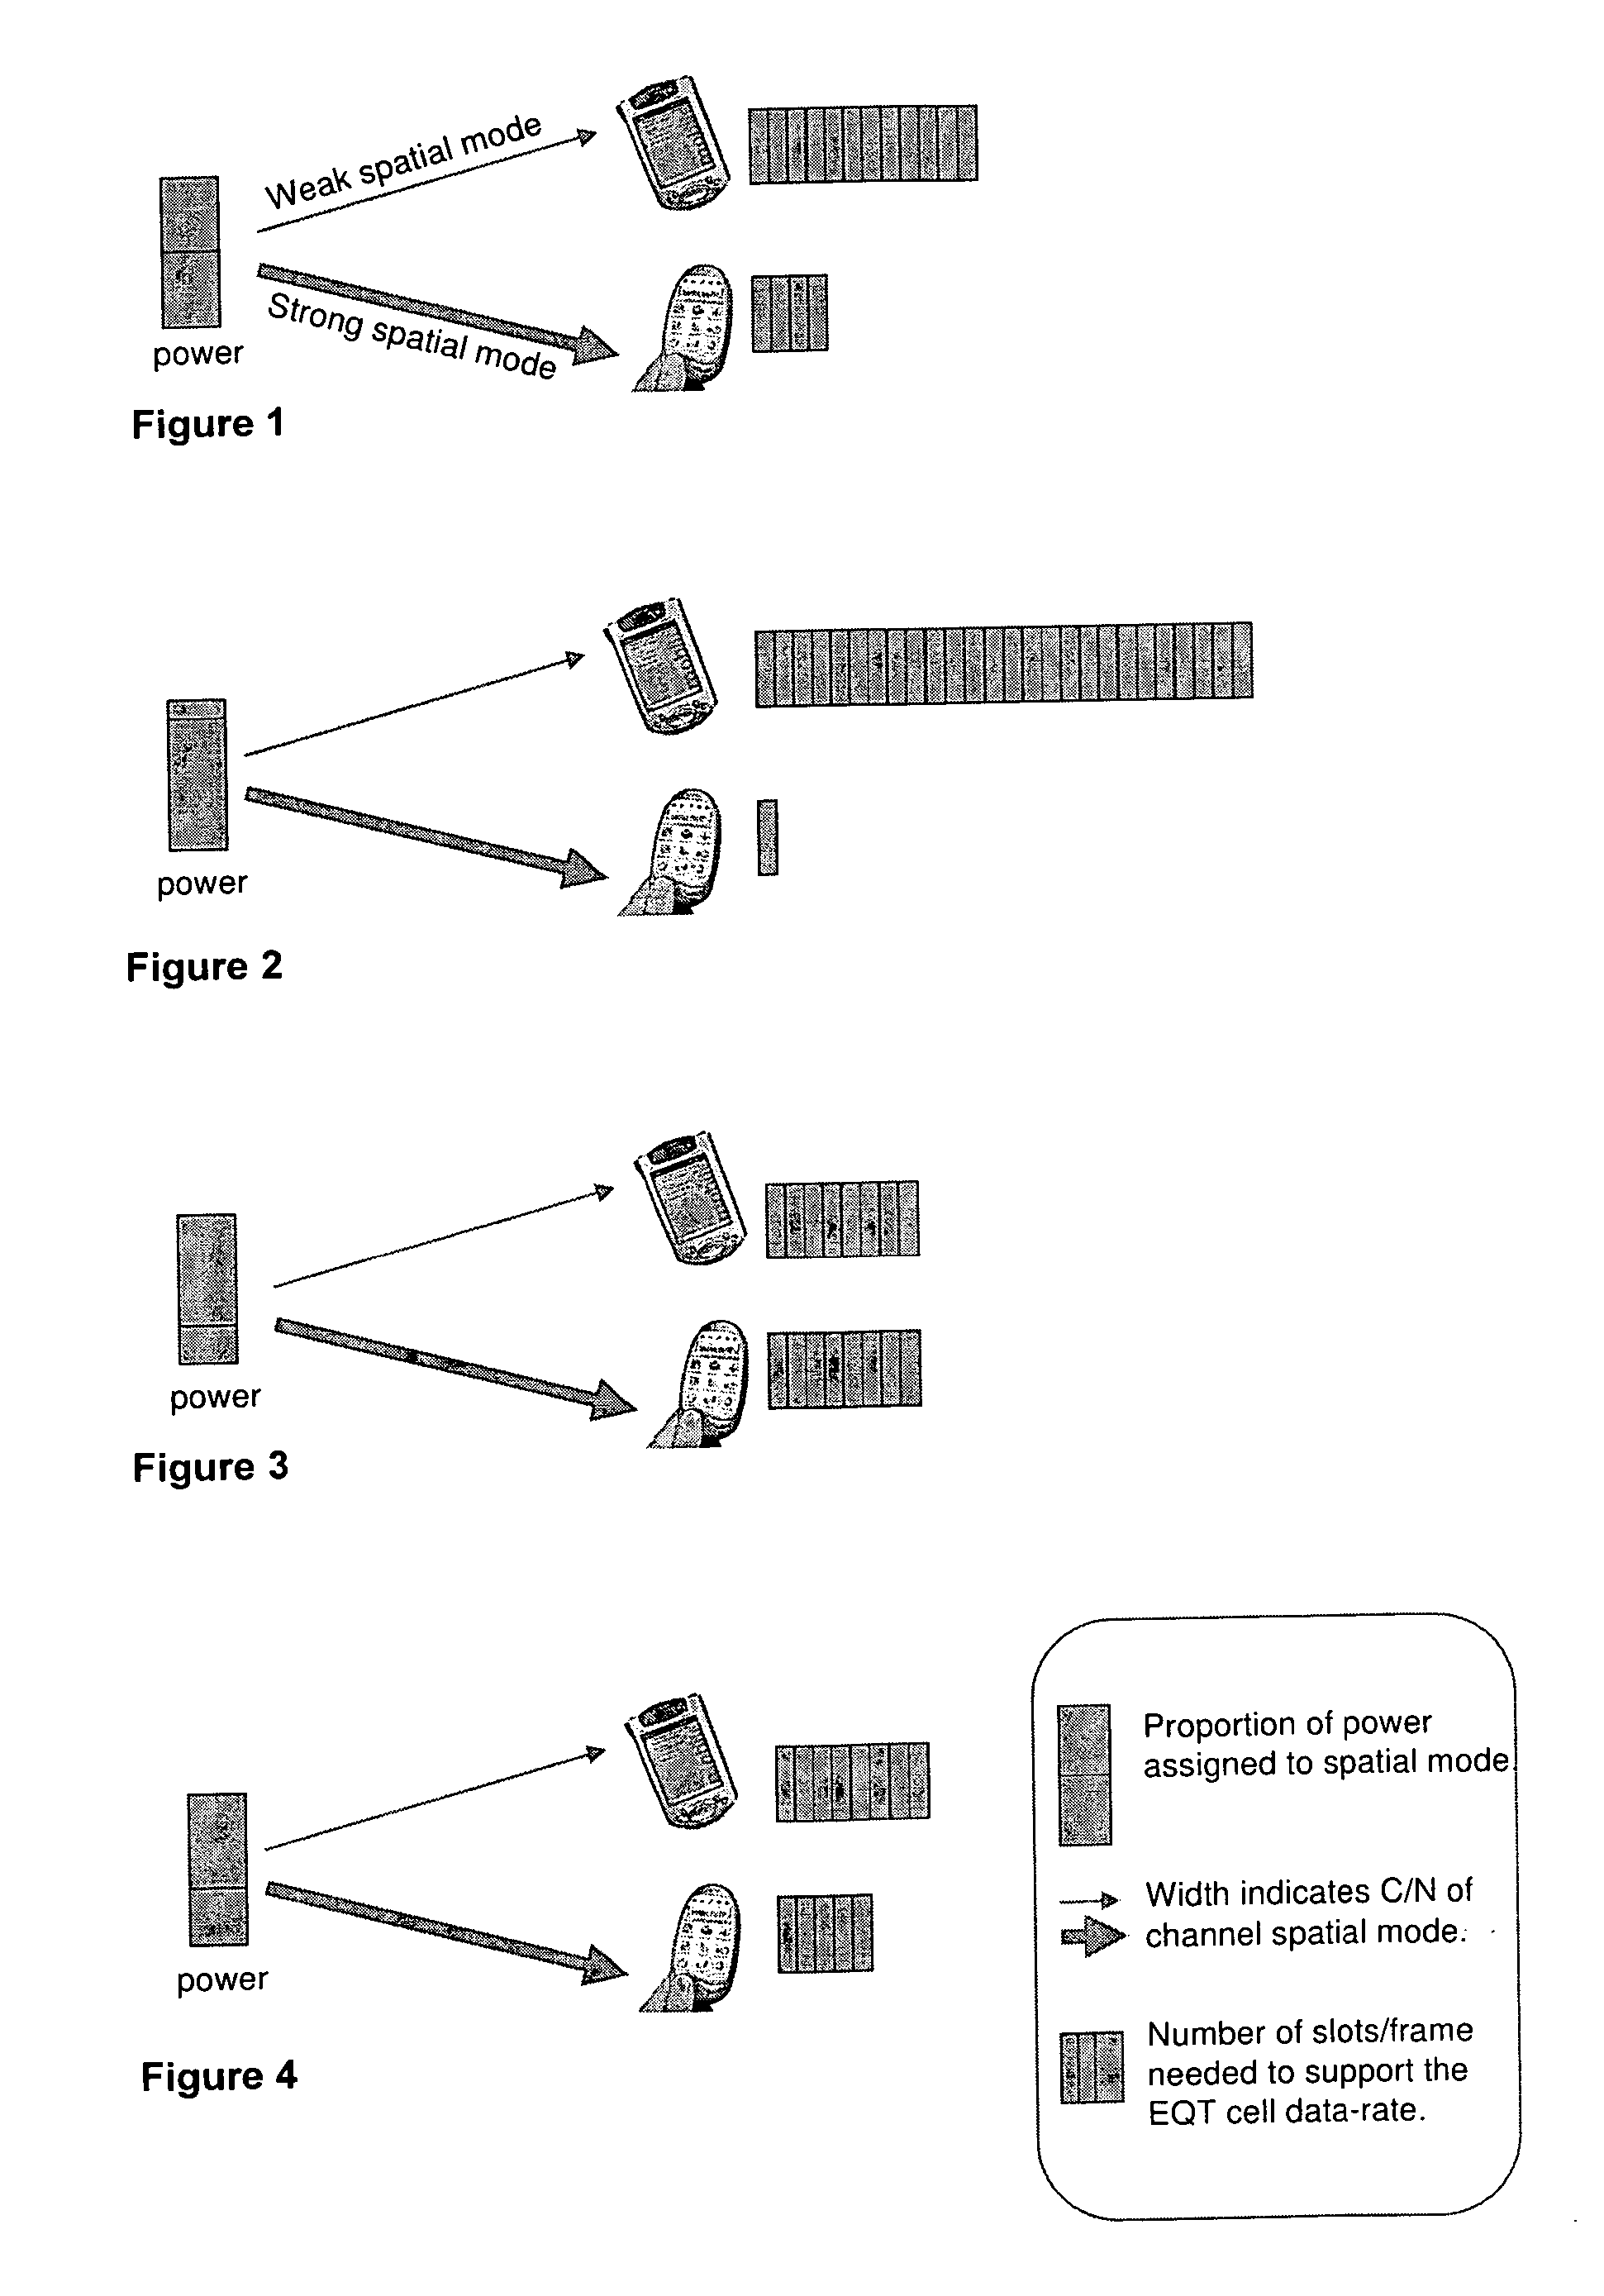 Transmit power allocation in a distributed MIMO system